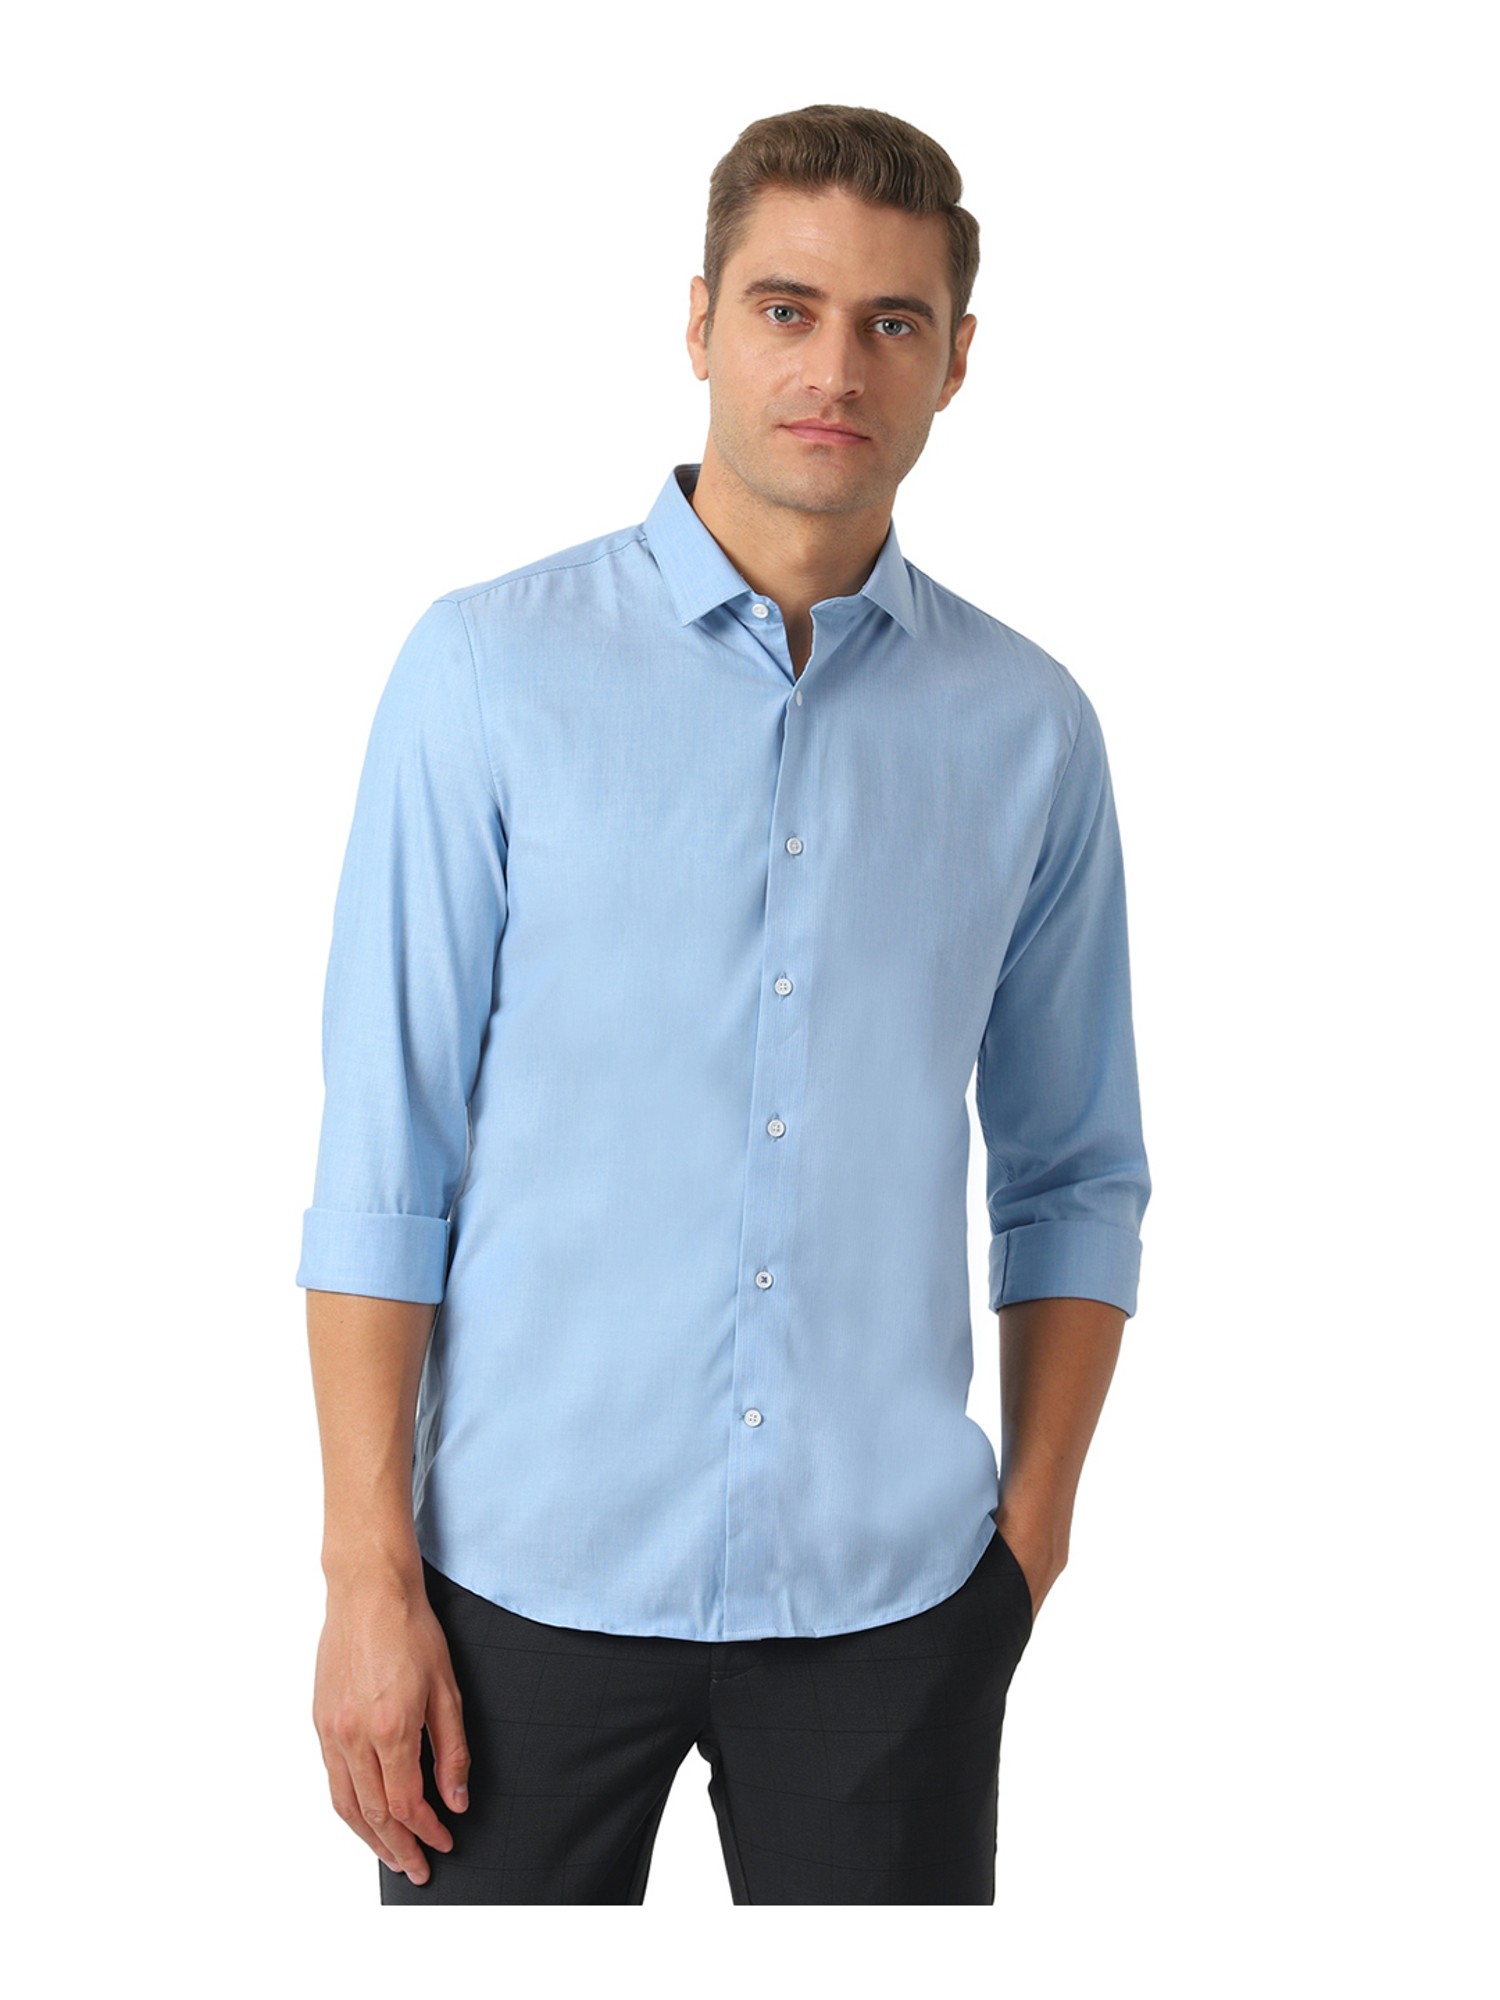 Louis Philippe Sport Blue Slim Fit Shirt From Louis Philippe Sport At Best Prices On Tata Cliq